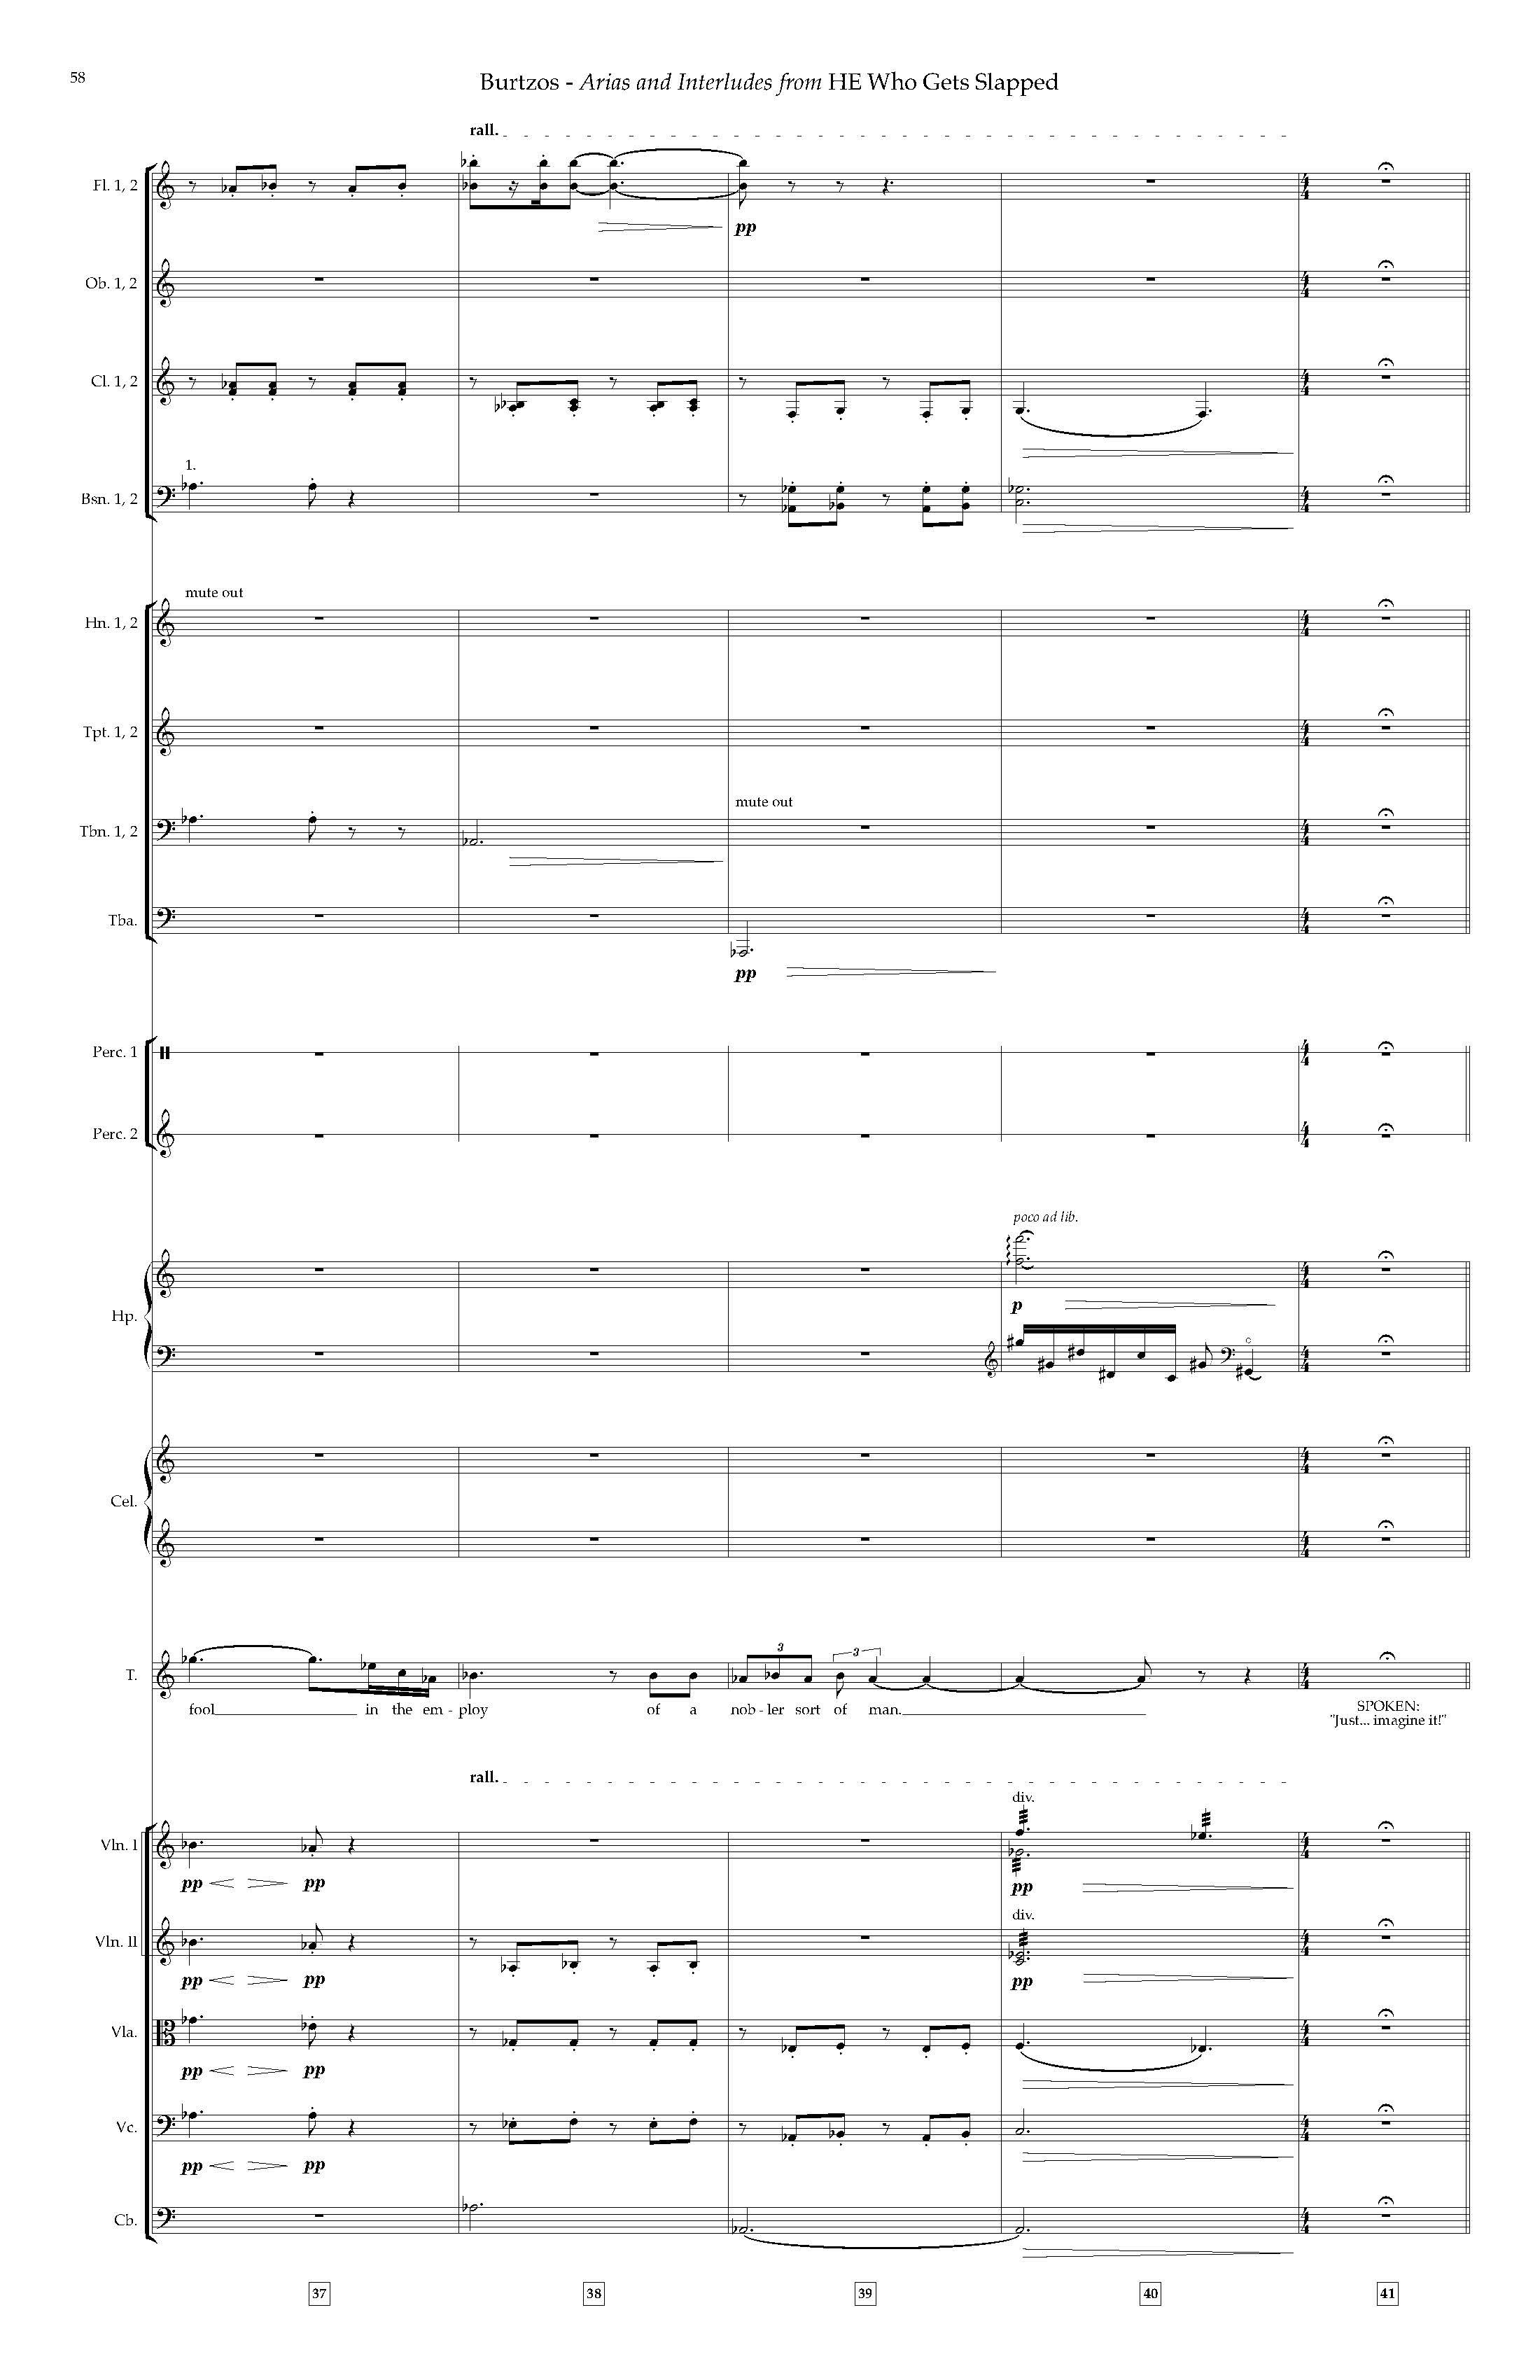 Arias and Interludes from HWGS - Complete Score_Page_64.jpg